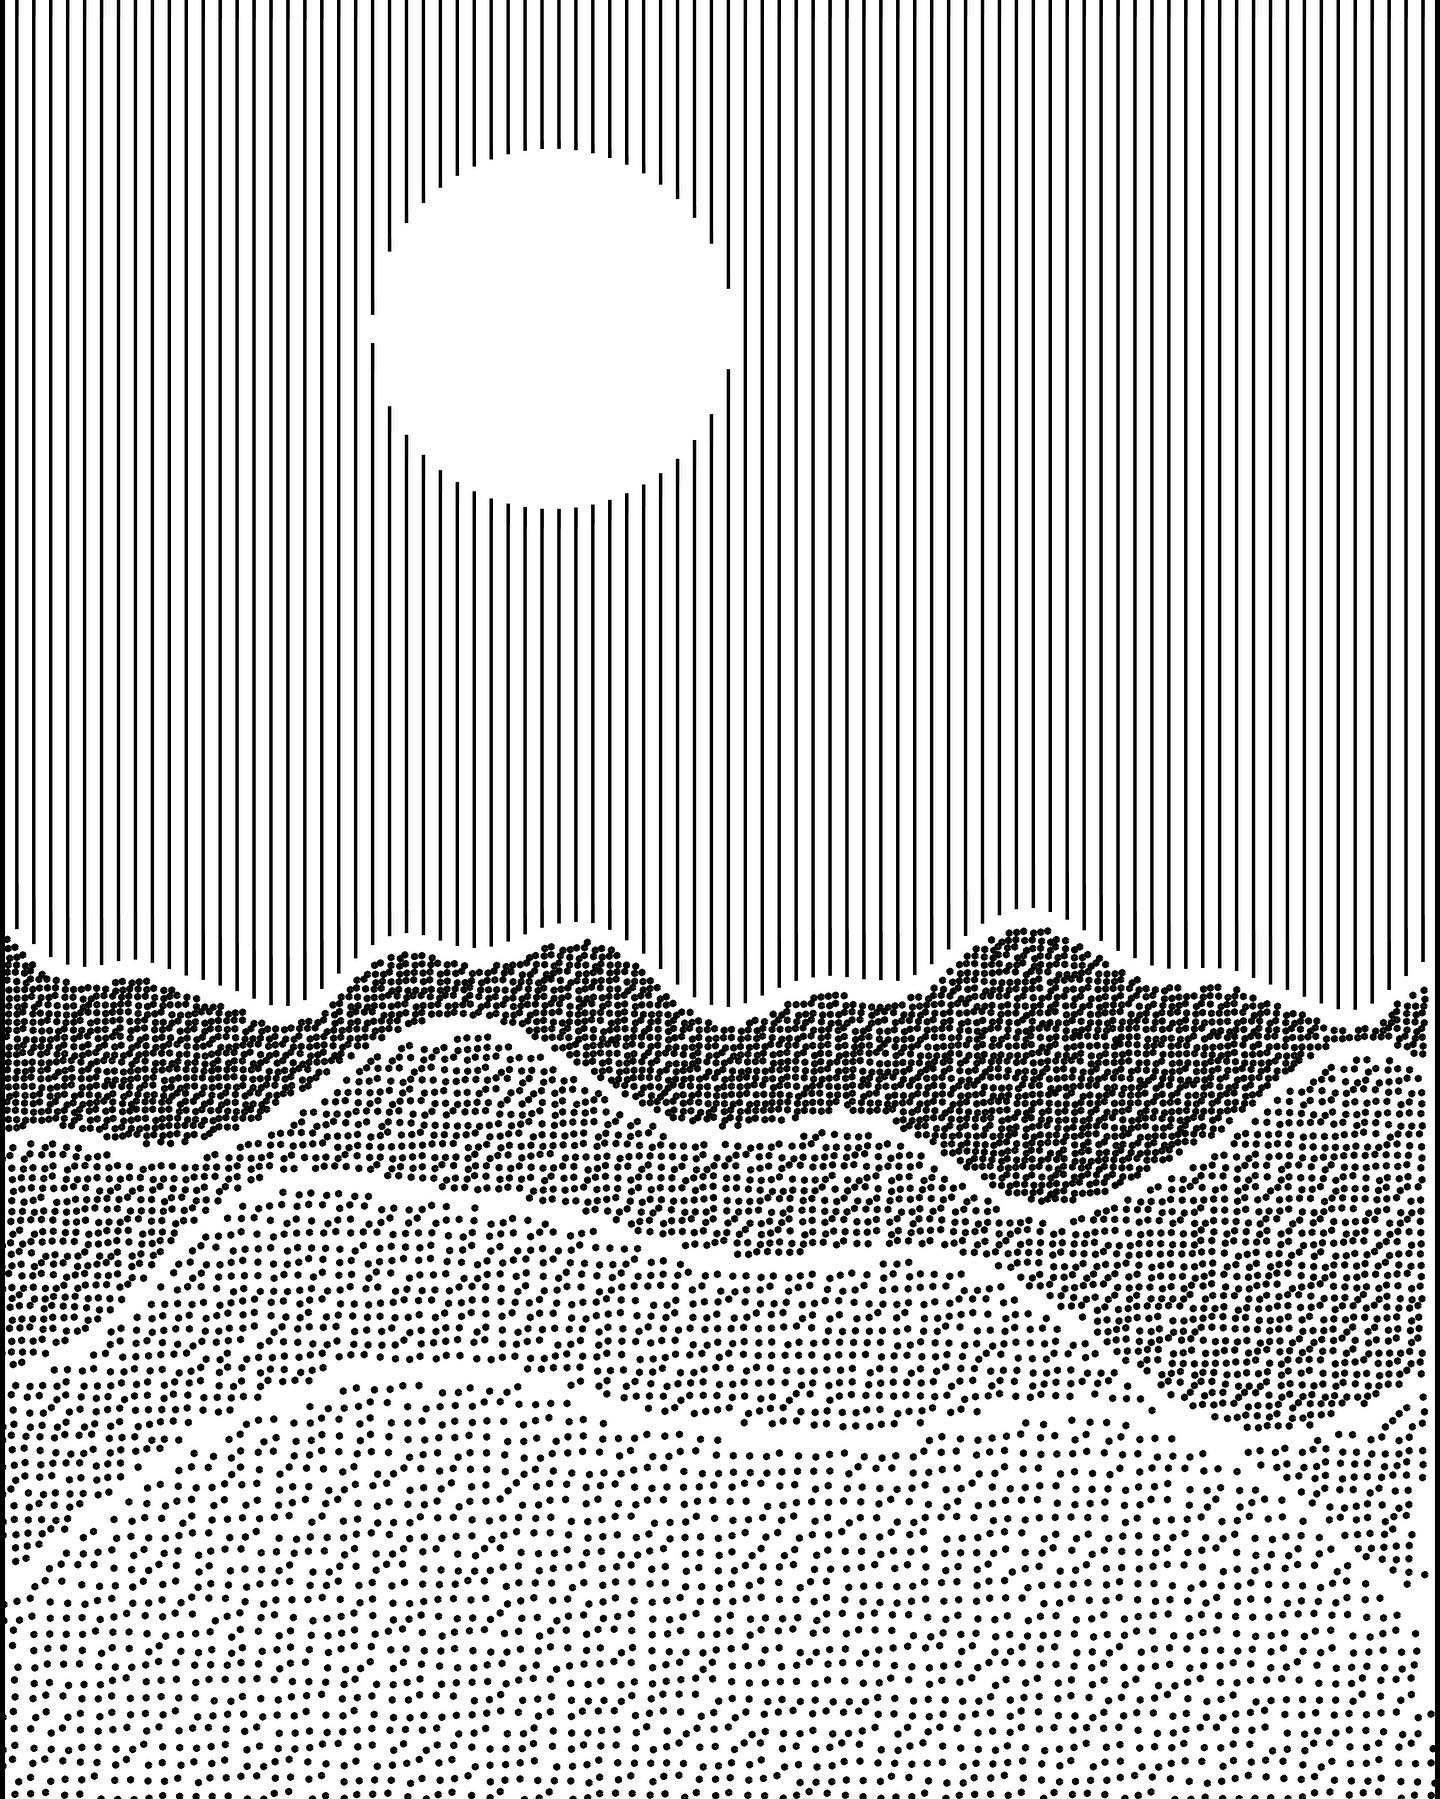 One of the initial randomly generated landscapes